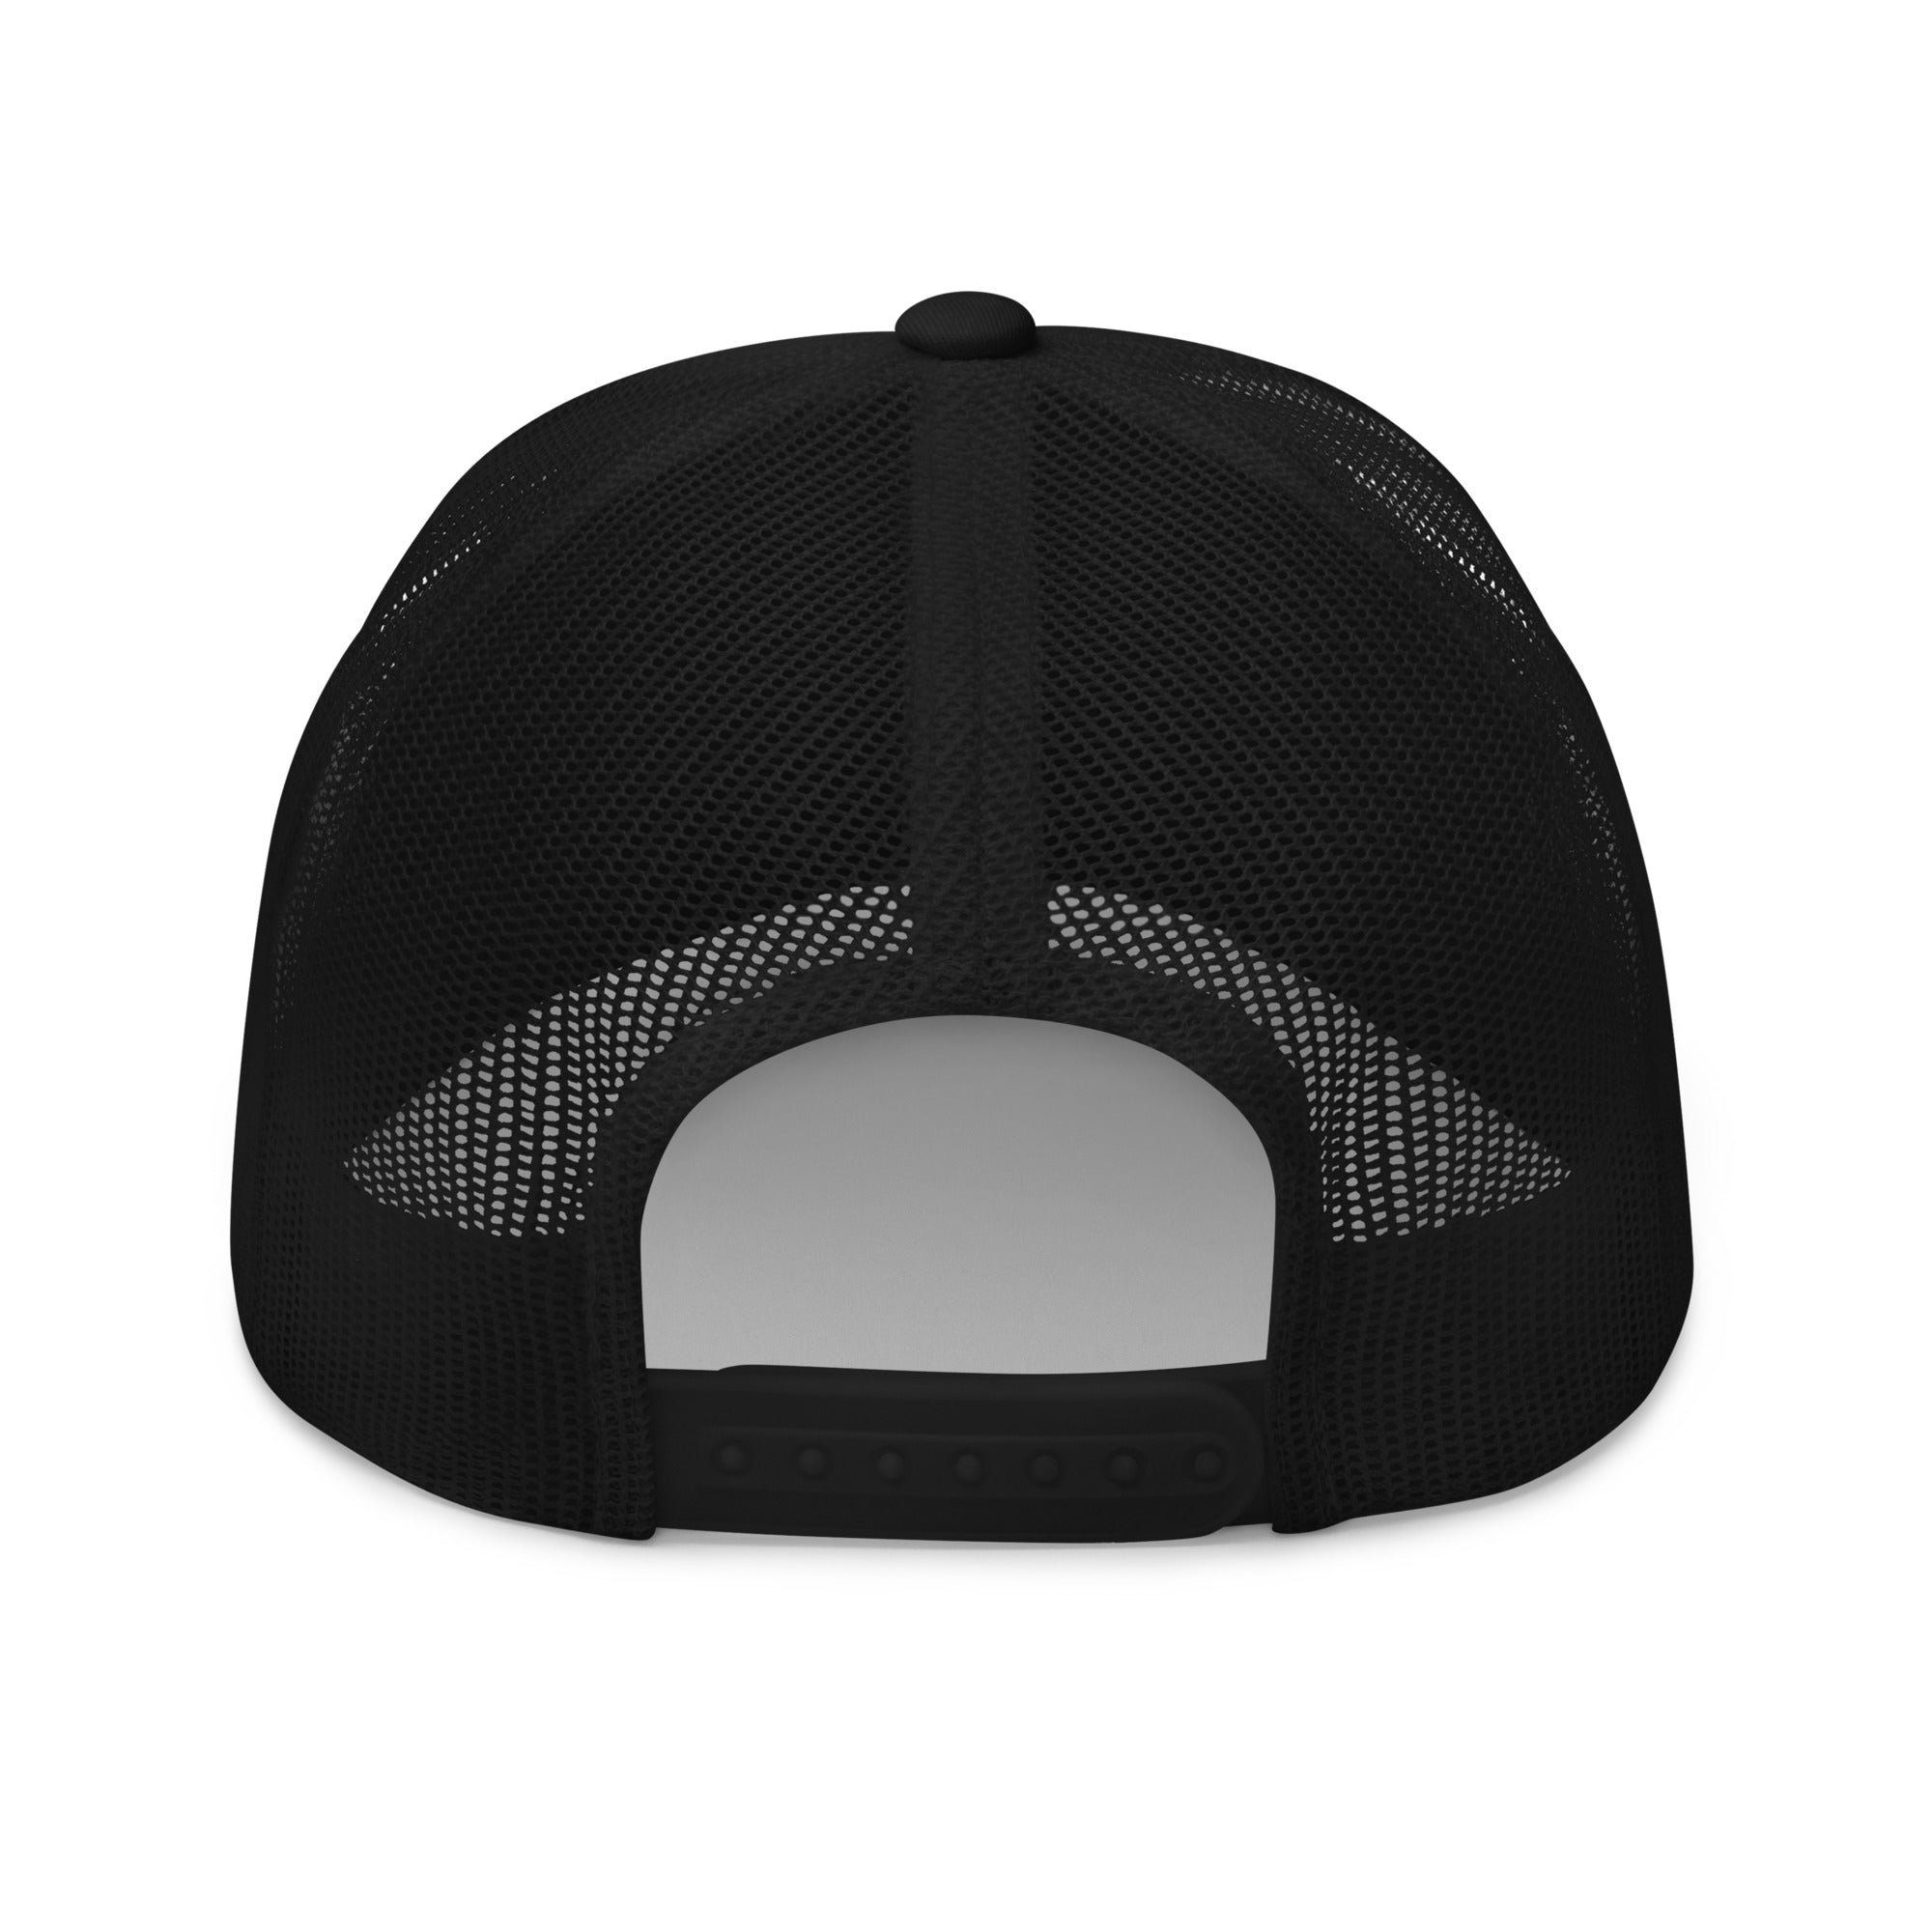 Bitcoin Merchandise - The Satoshi Trucker Hat has mesh back panels and a snapback closure. Back view.